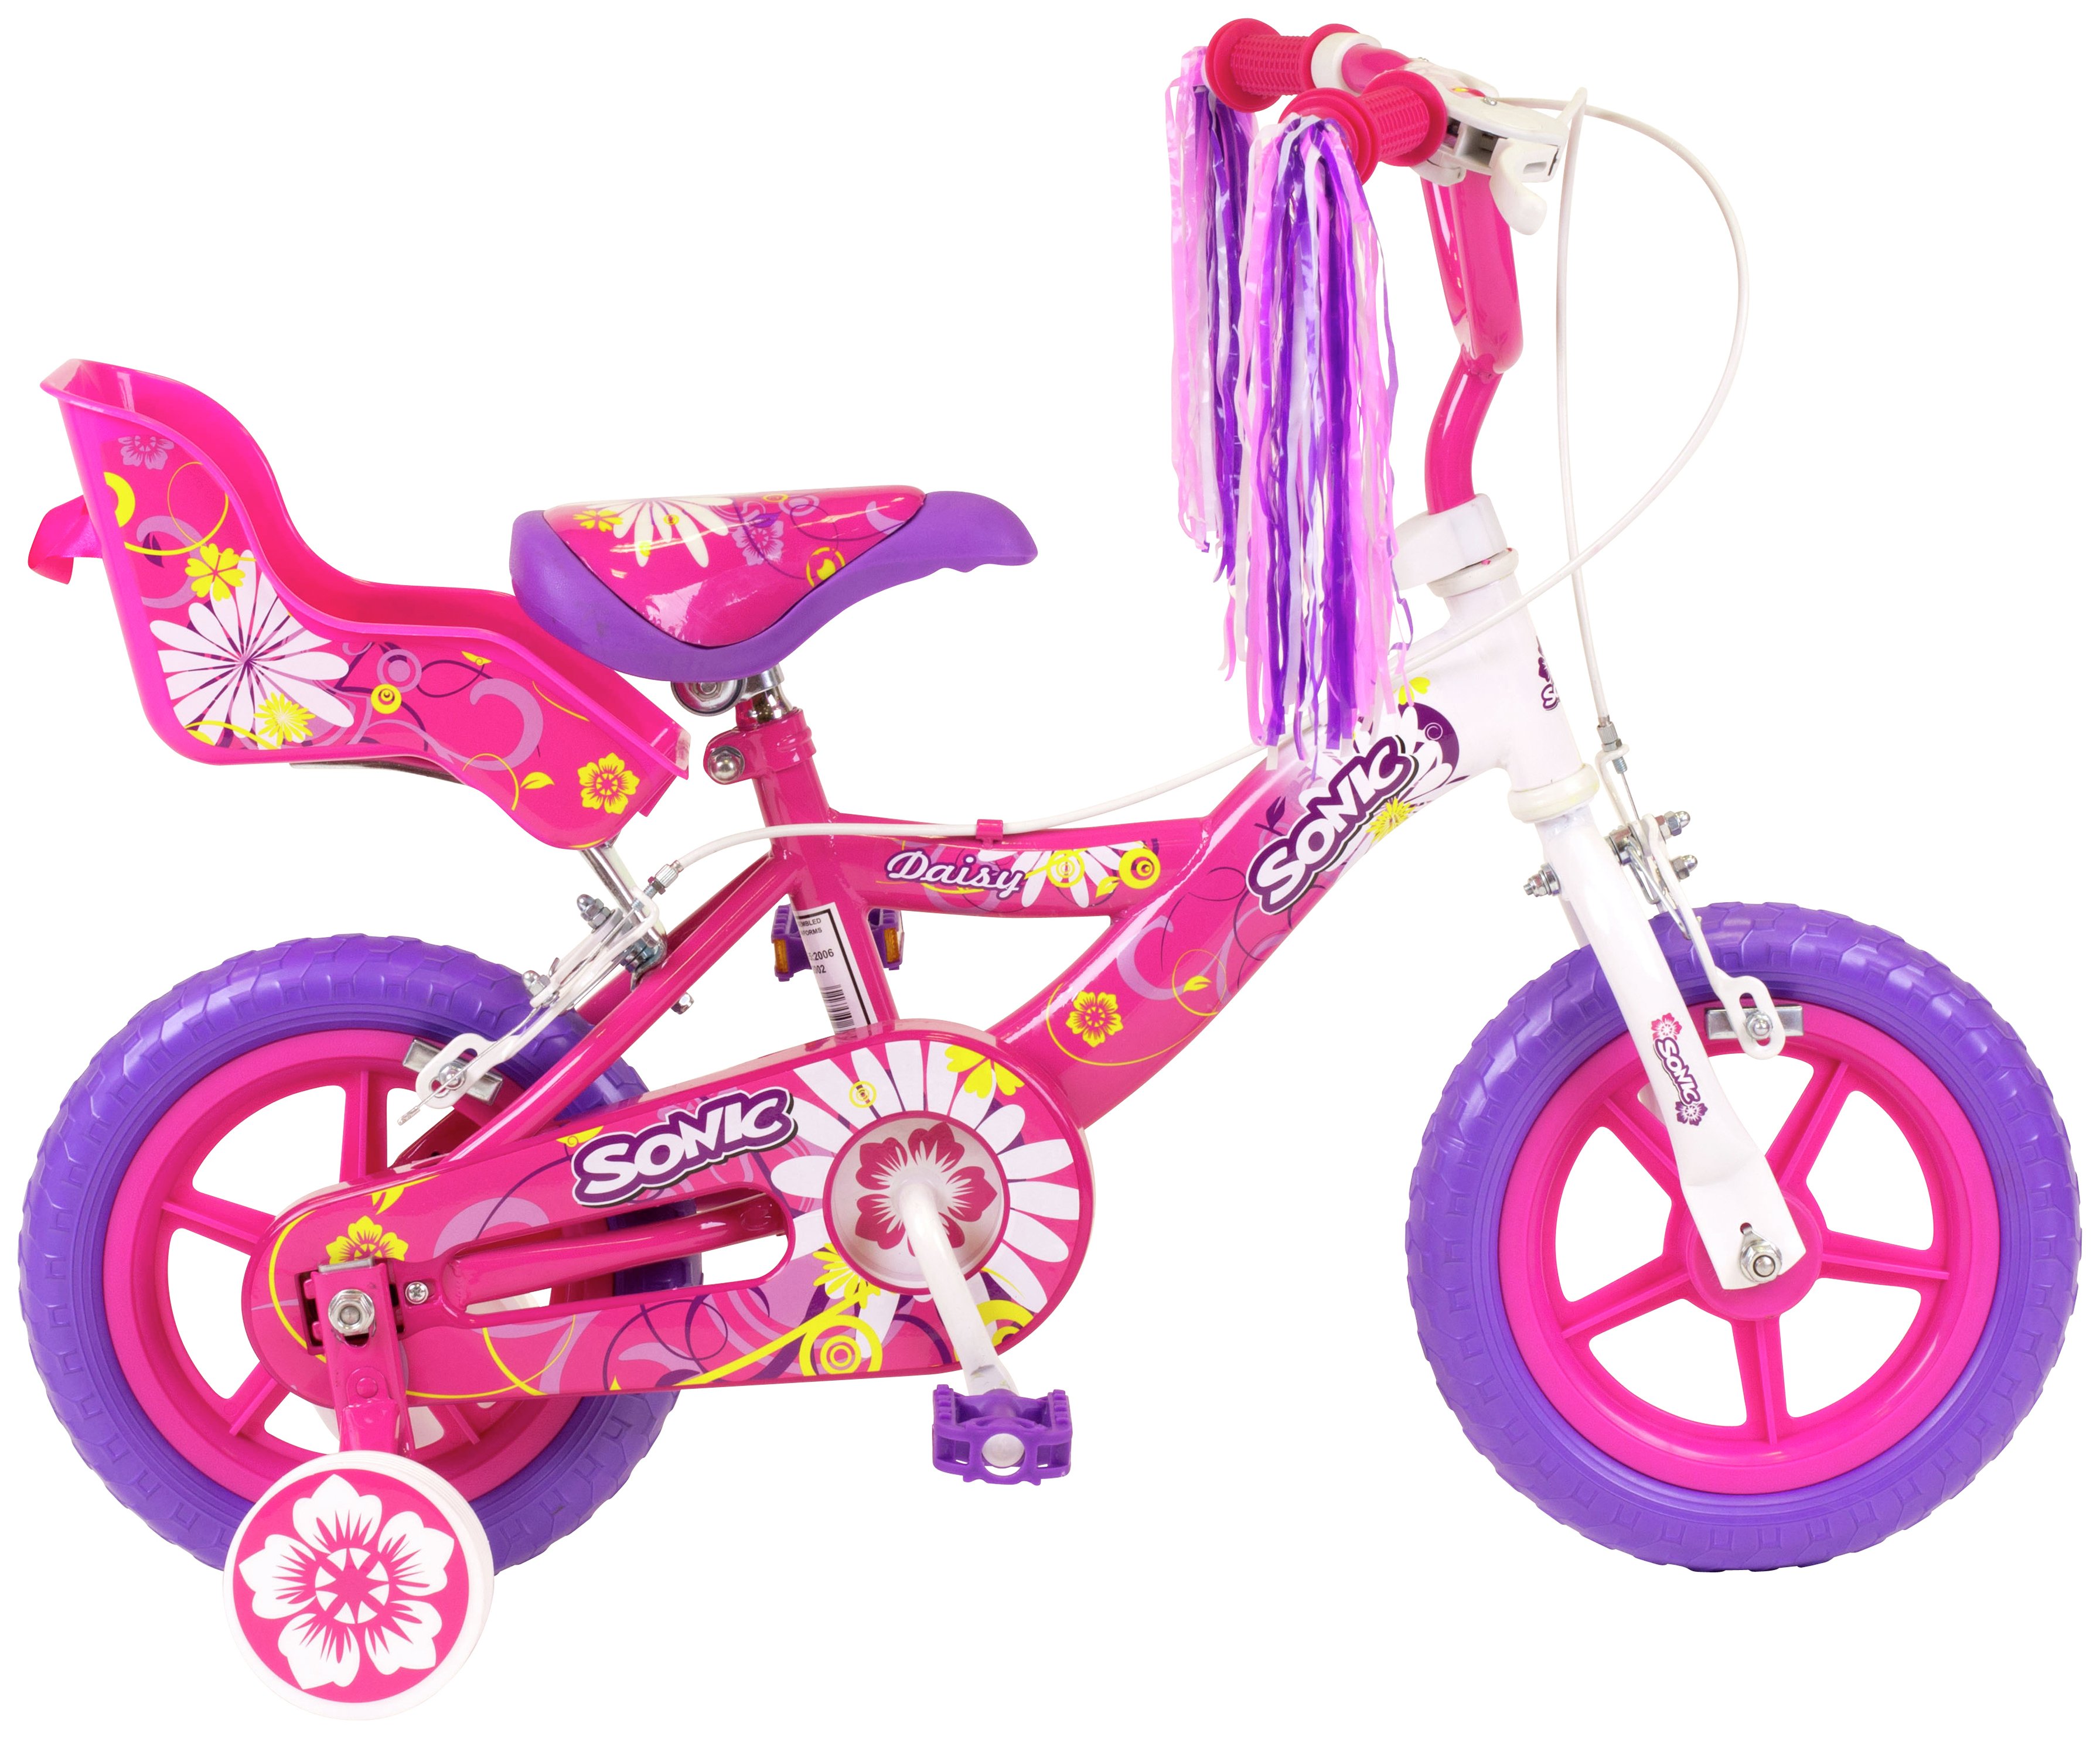 Sonic Glitz 12'' Kids' Bike – with stabilisers | Toys - compare and save